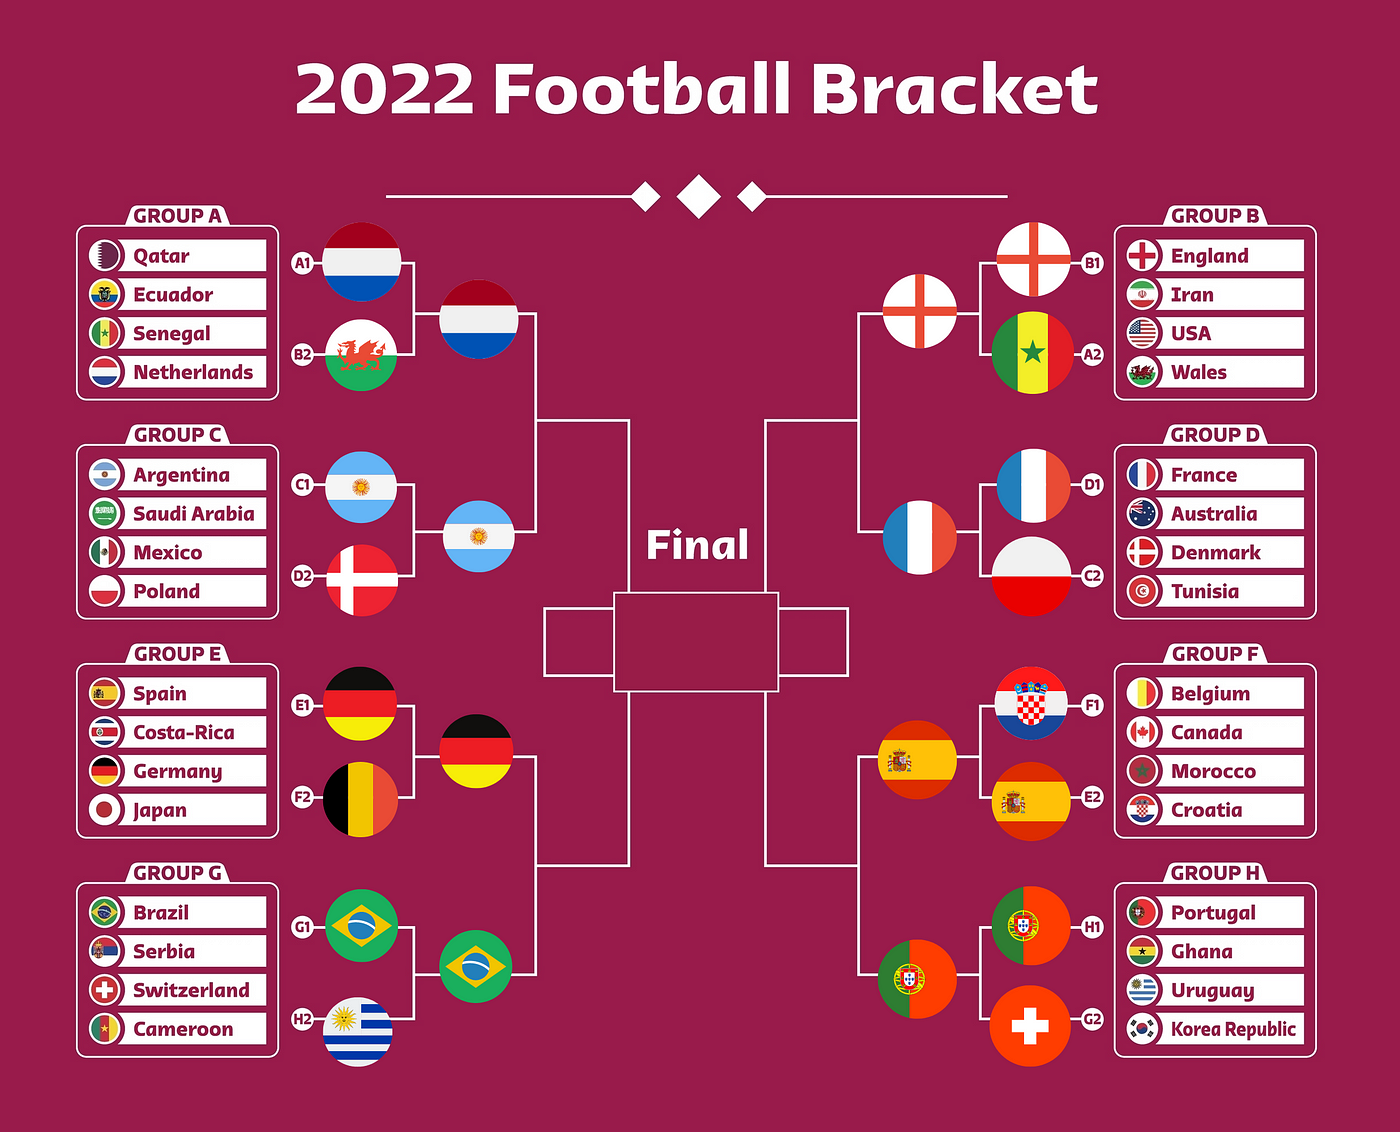 Predicting The FIFA World Cup 2022 With a Simple Model using Python by The PyCoach Towards Data Science